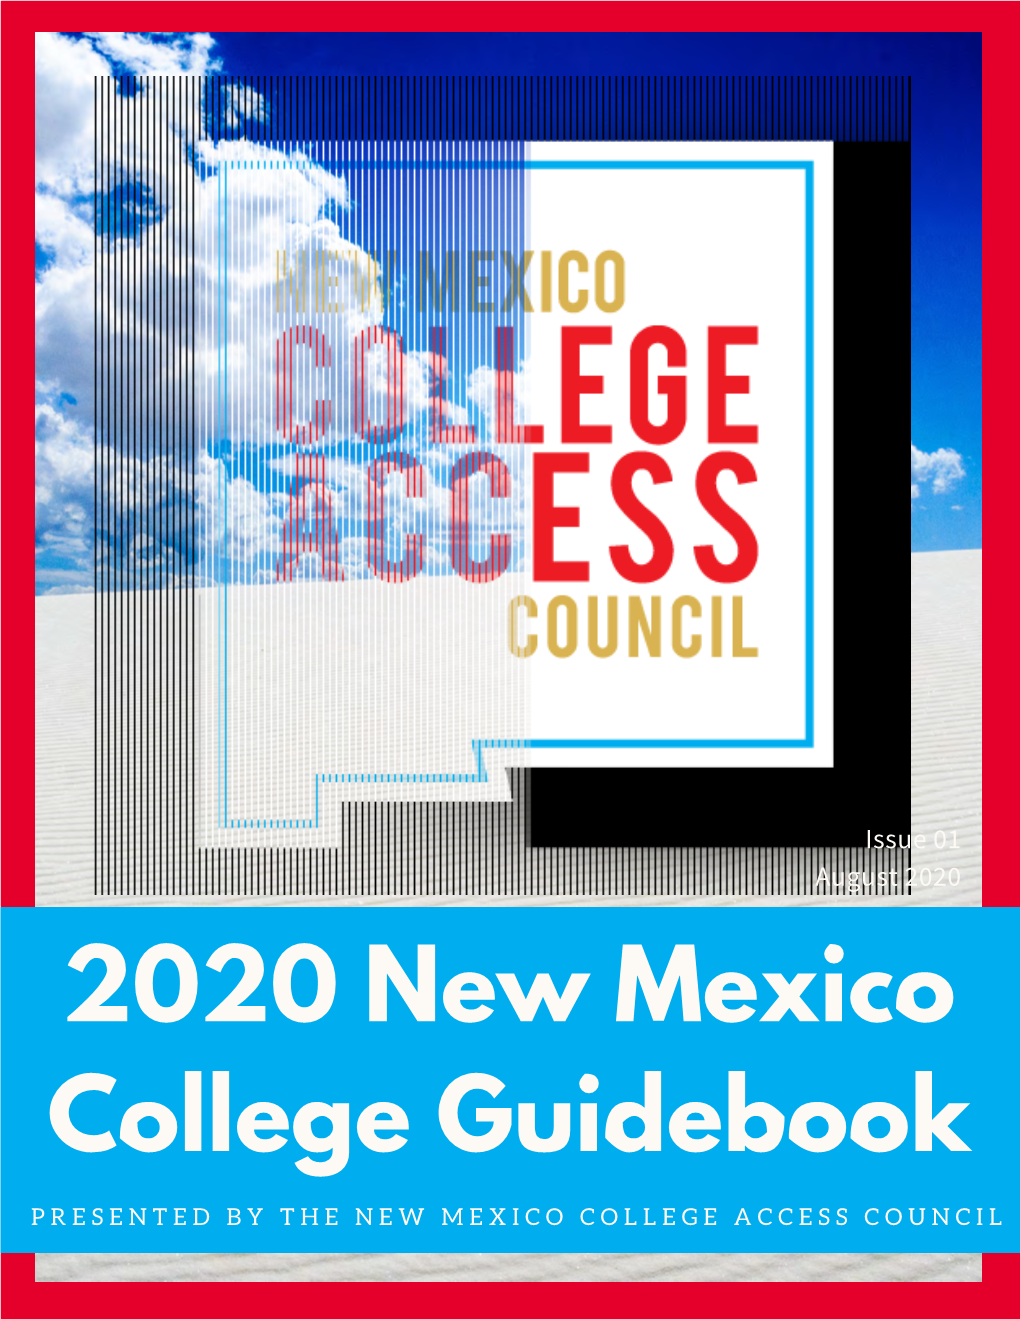 2020 New Mexico College Guidebook